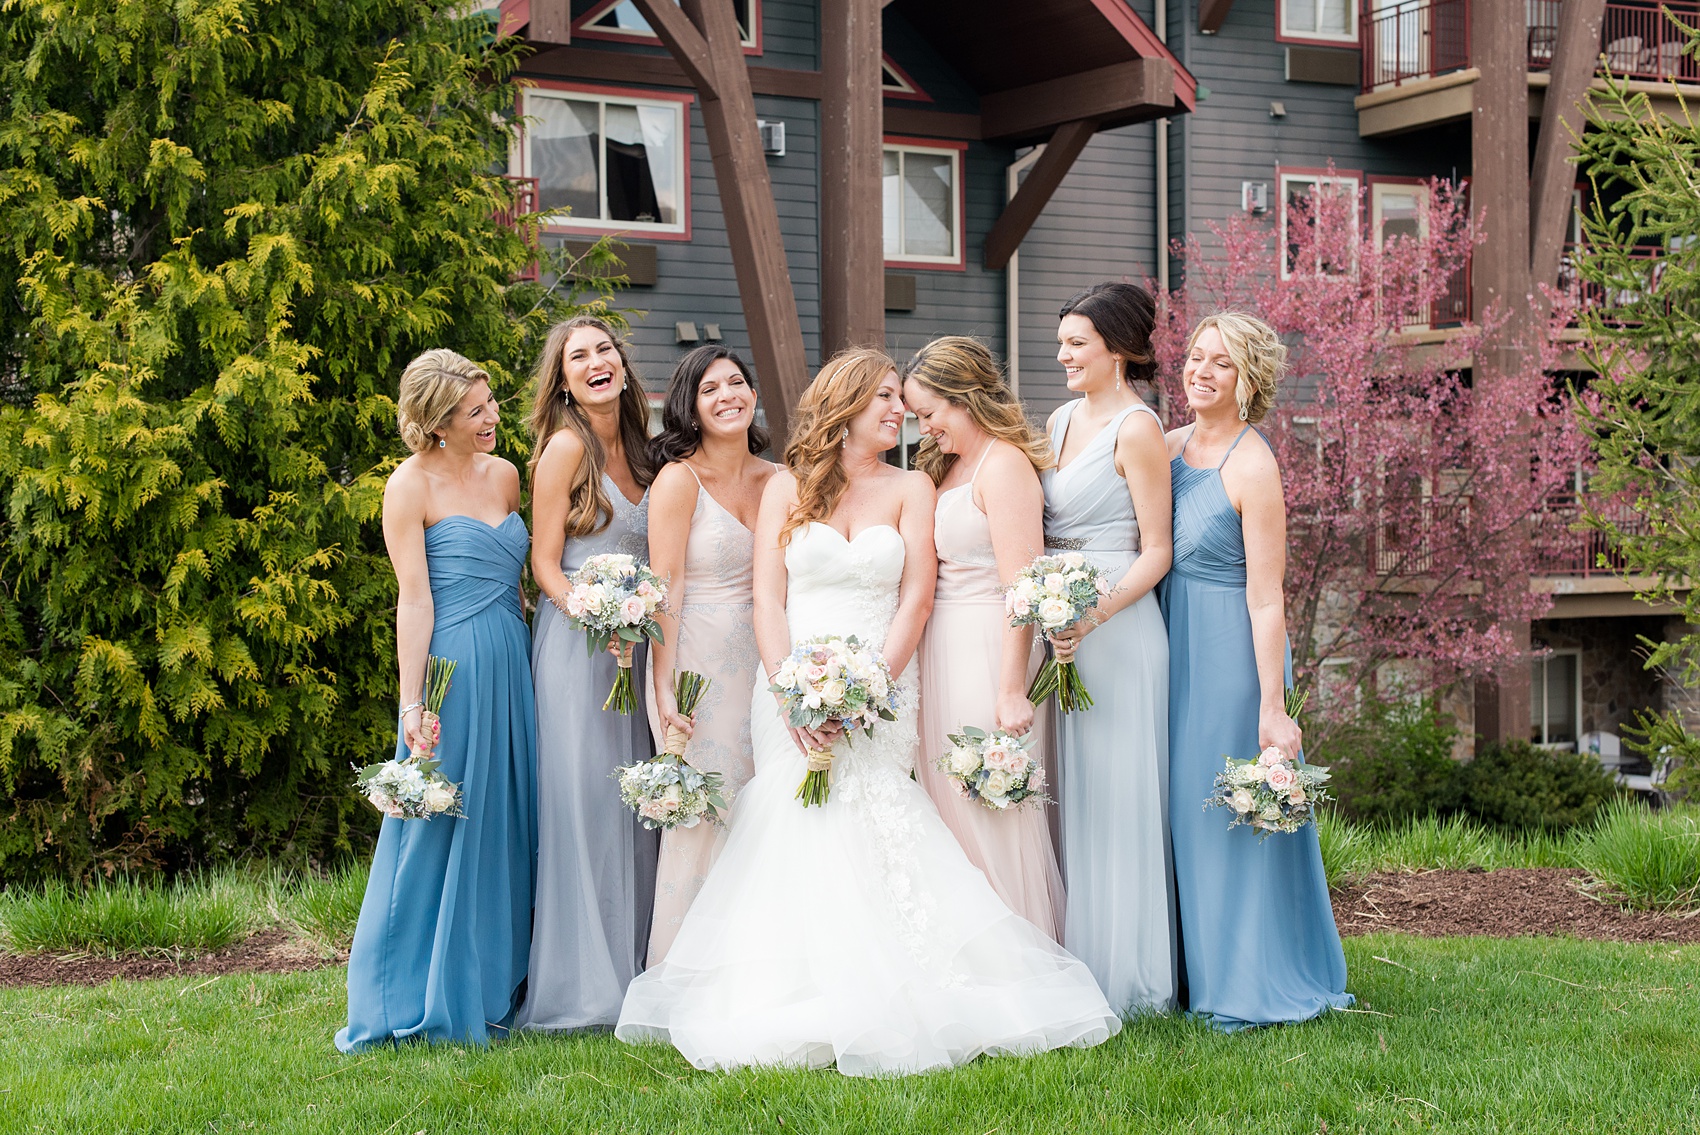 Crystal Springs Resort wedding photos in New Jersey, with photographer Mikkel Paige Photography. The couple’s spring wedding had an outdoor ceremony with photos at this rustic, woodsy venue showing their blue and pink palette decor from getting ready to their reception. This picture shows the bridal party (bridesmaids) in their mismatched blue and pink gowns. Click through to see their complete wedding recap! #NewJerseywedding #MikkelPaige #NJweddingphotographer #NJphotographer #brideandgroom #springwedding #mismatchedgowns #pinkandblue #weddingparty #bridalparty